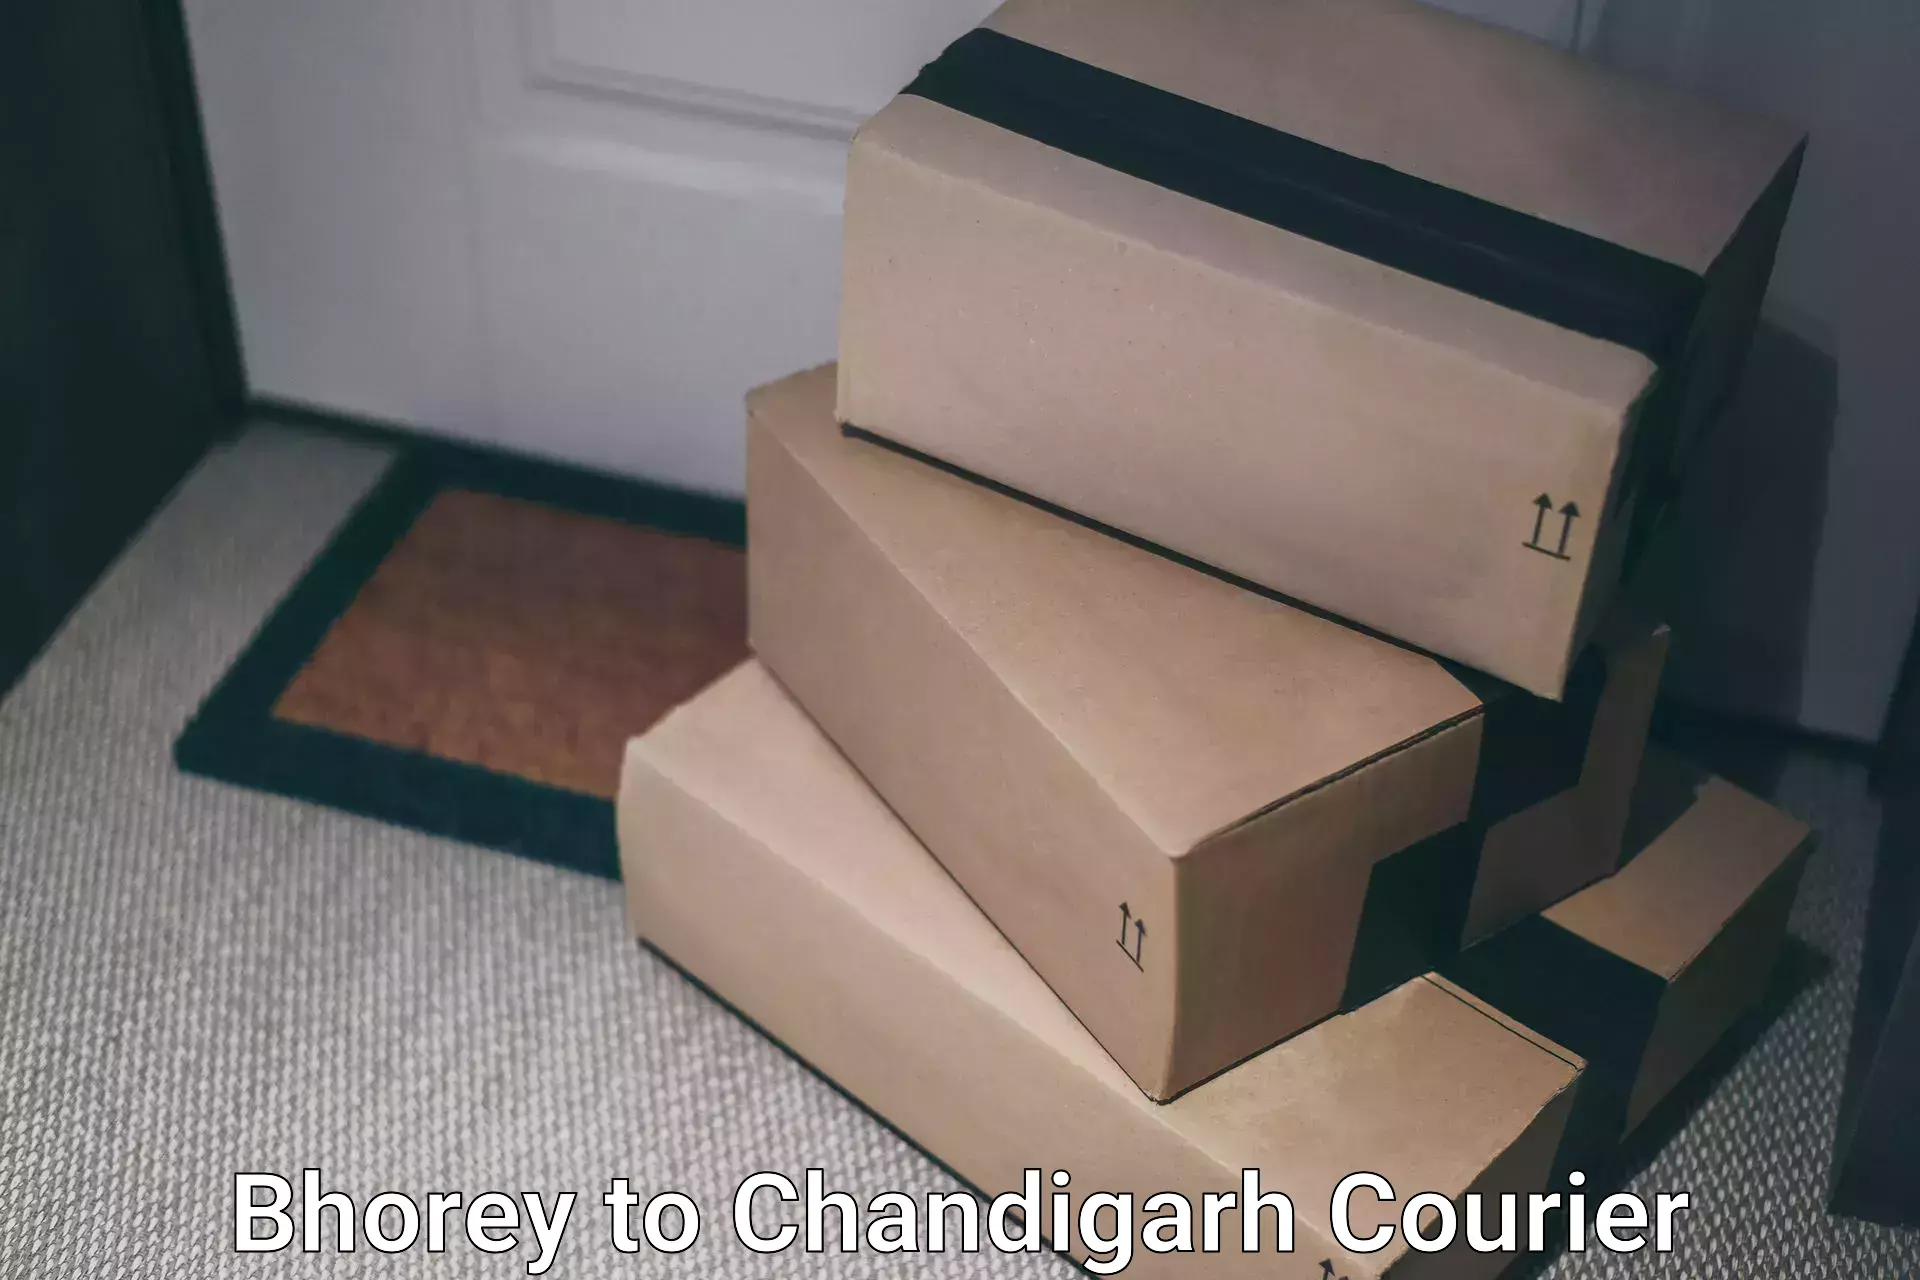 Quality courier partnerships Bhorey to Chandigarh